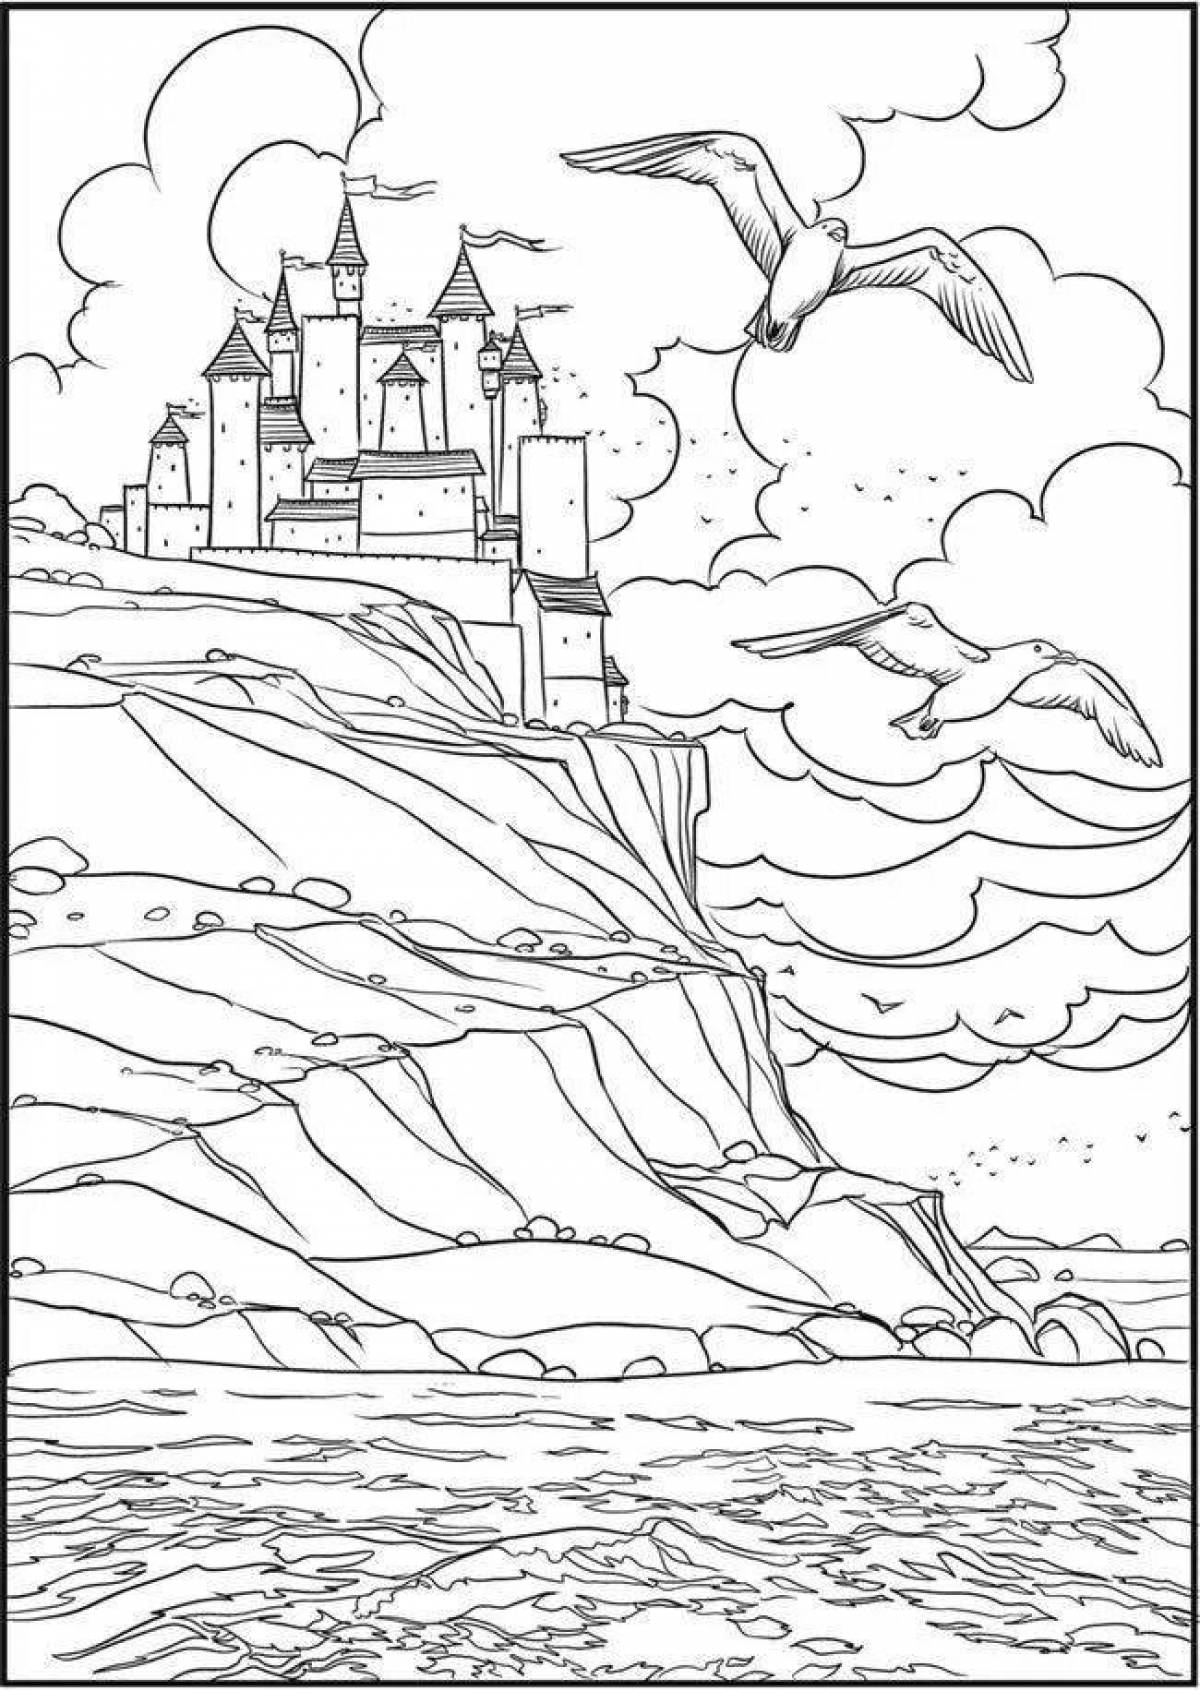 Coloring page charming seascape